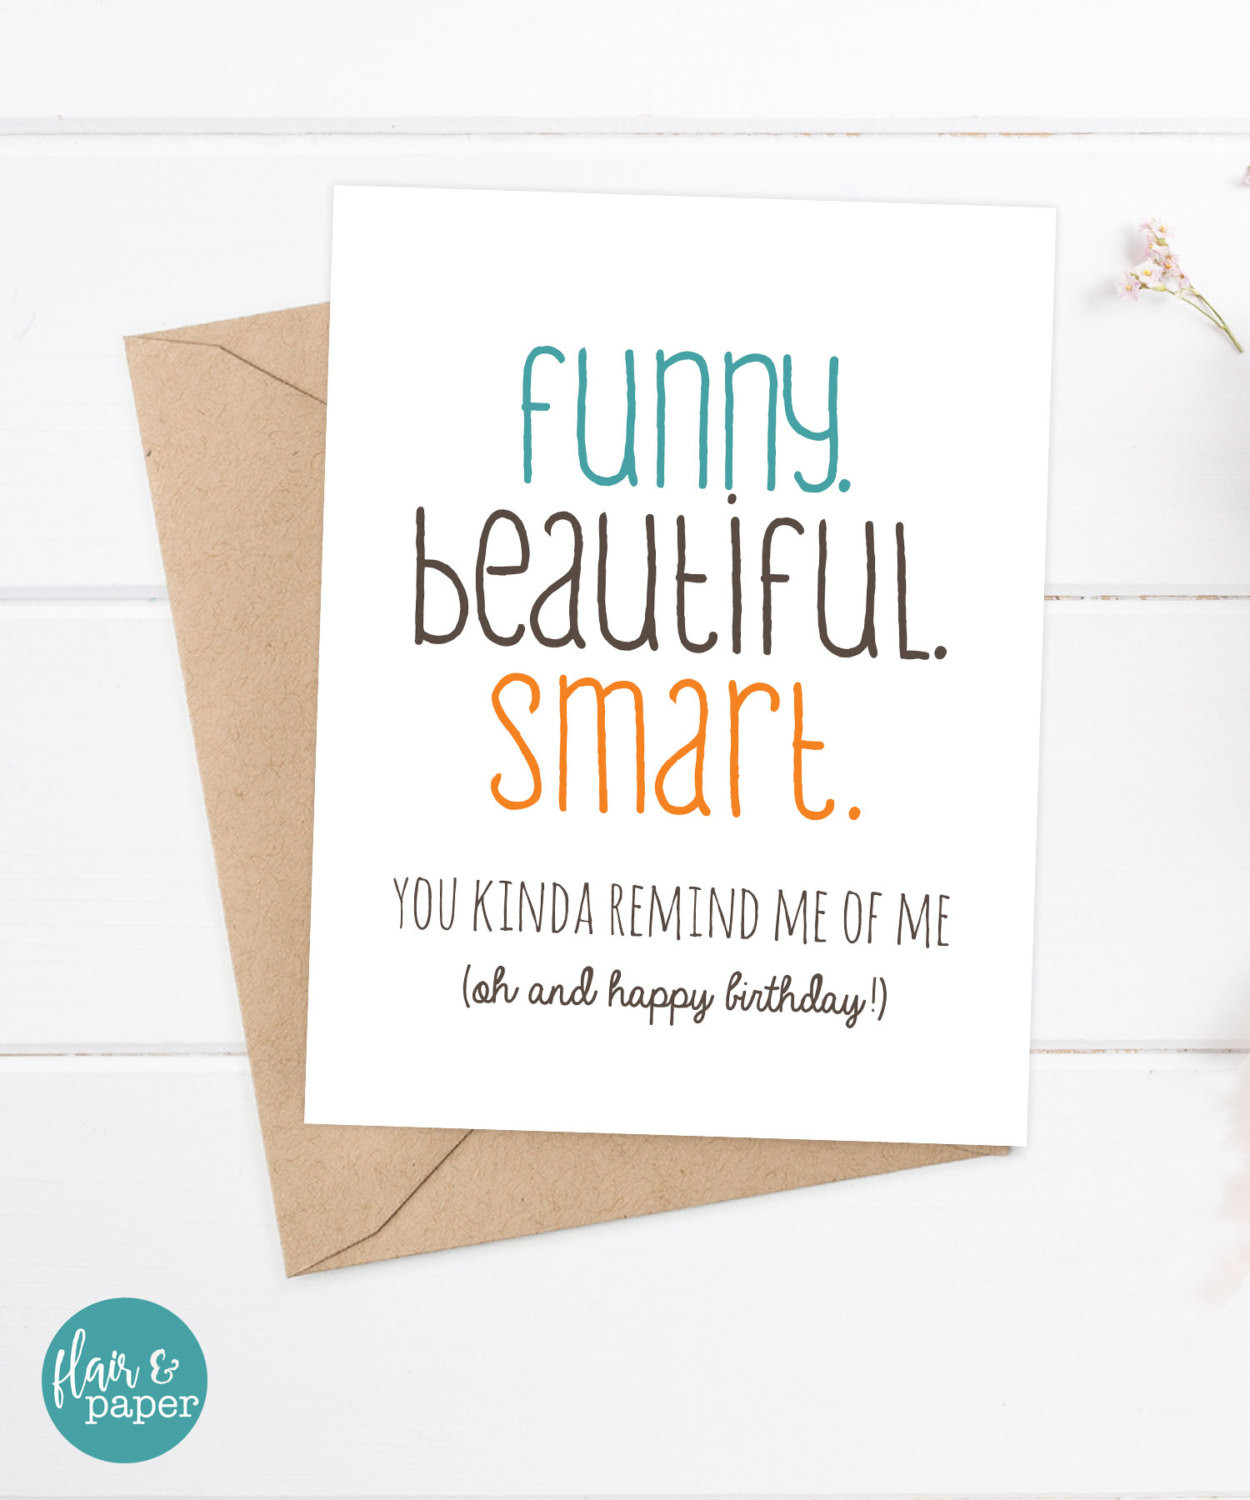 Funny Happy Birthday Quotes For Girlfriend
 Girlfriend Birthday Card Friend Birthday Sister Birthday